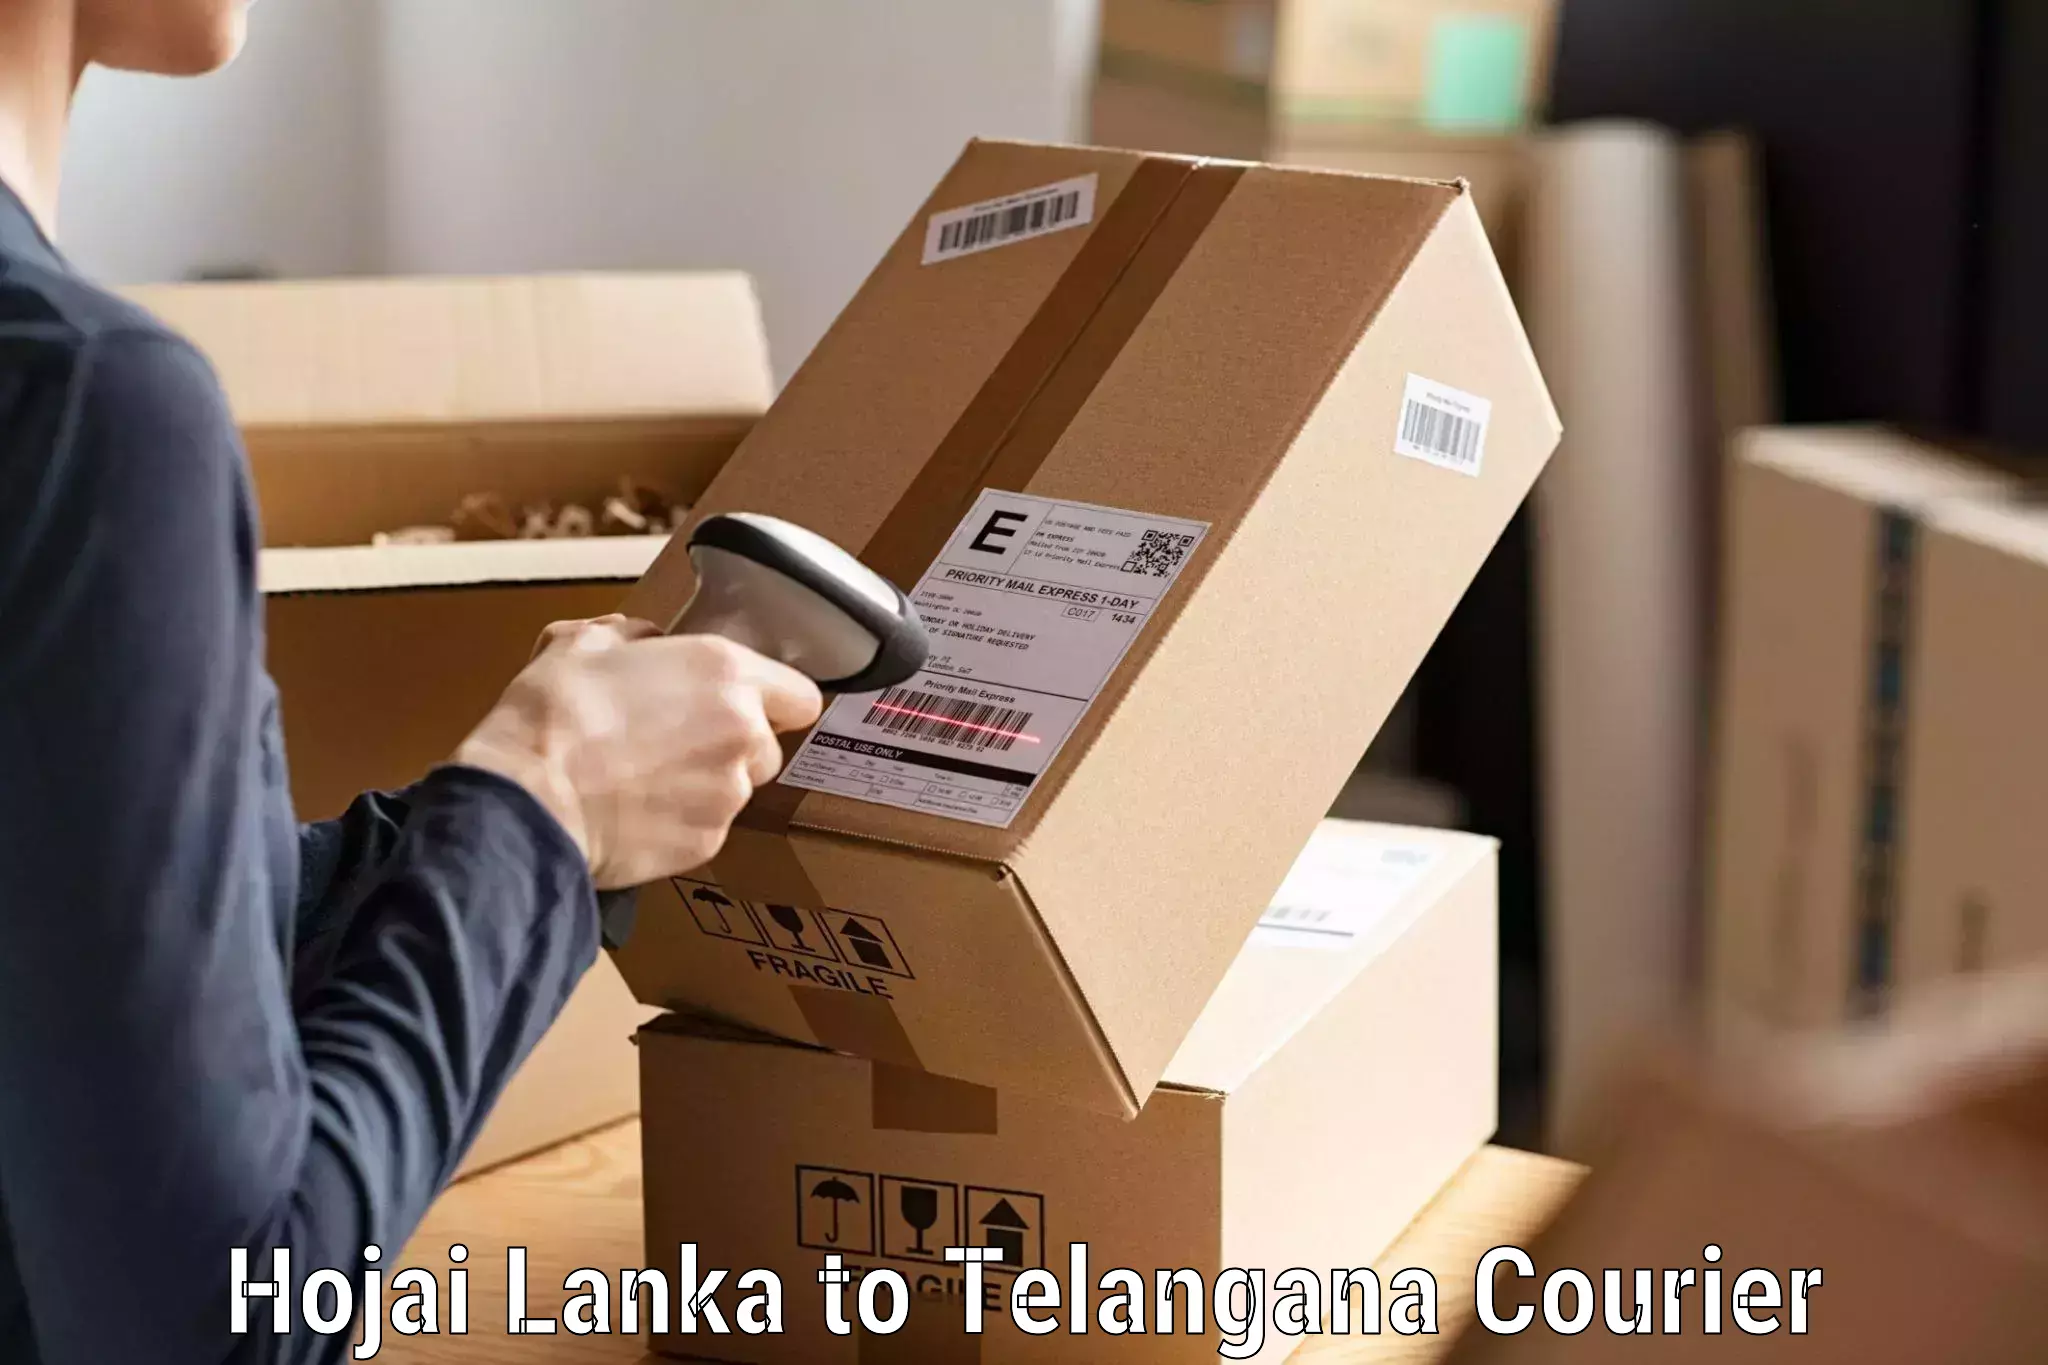 Reliable courier service in Hojai Lanka to Yerrupalem